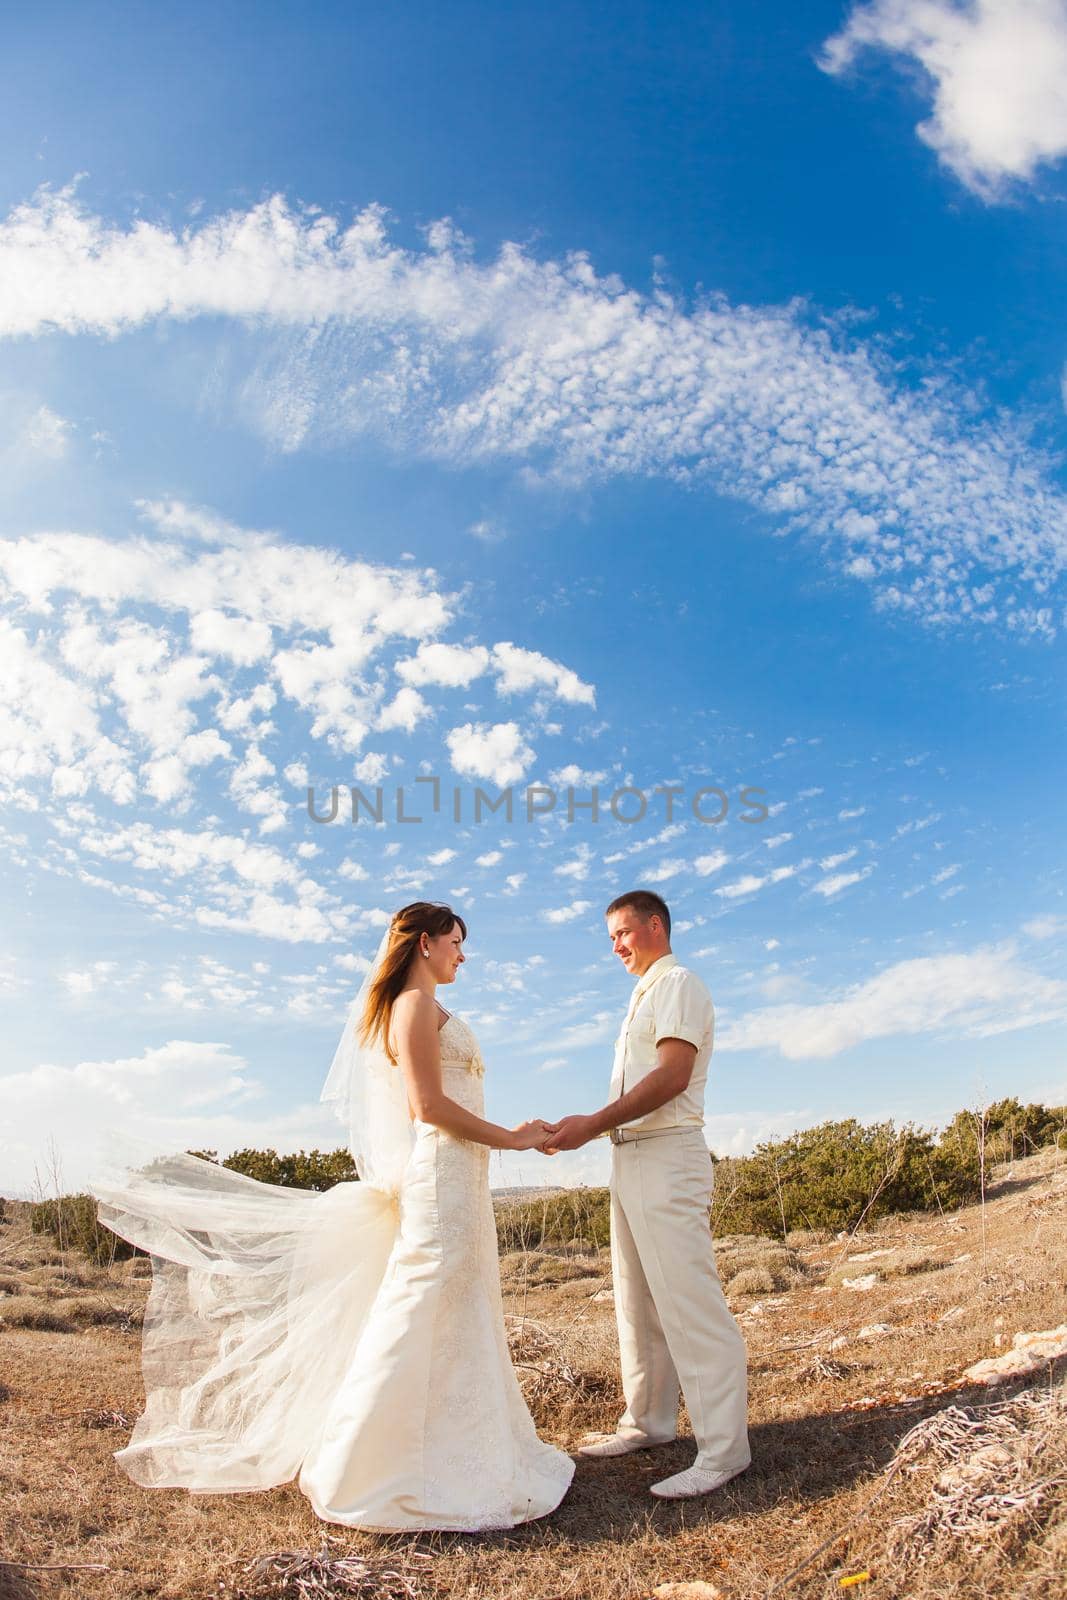 Portrait of happy bride and groom outdoor in nature location. Summer or autumn season.